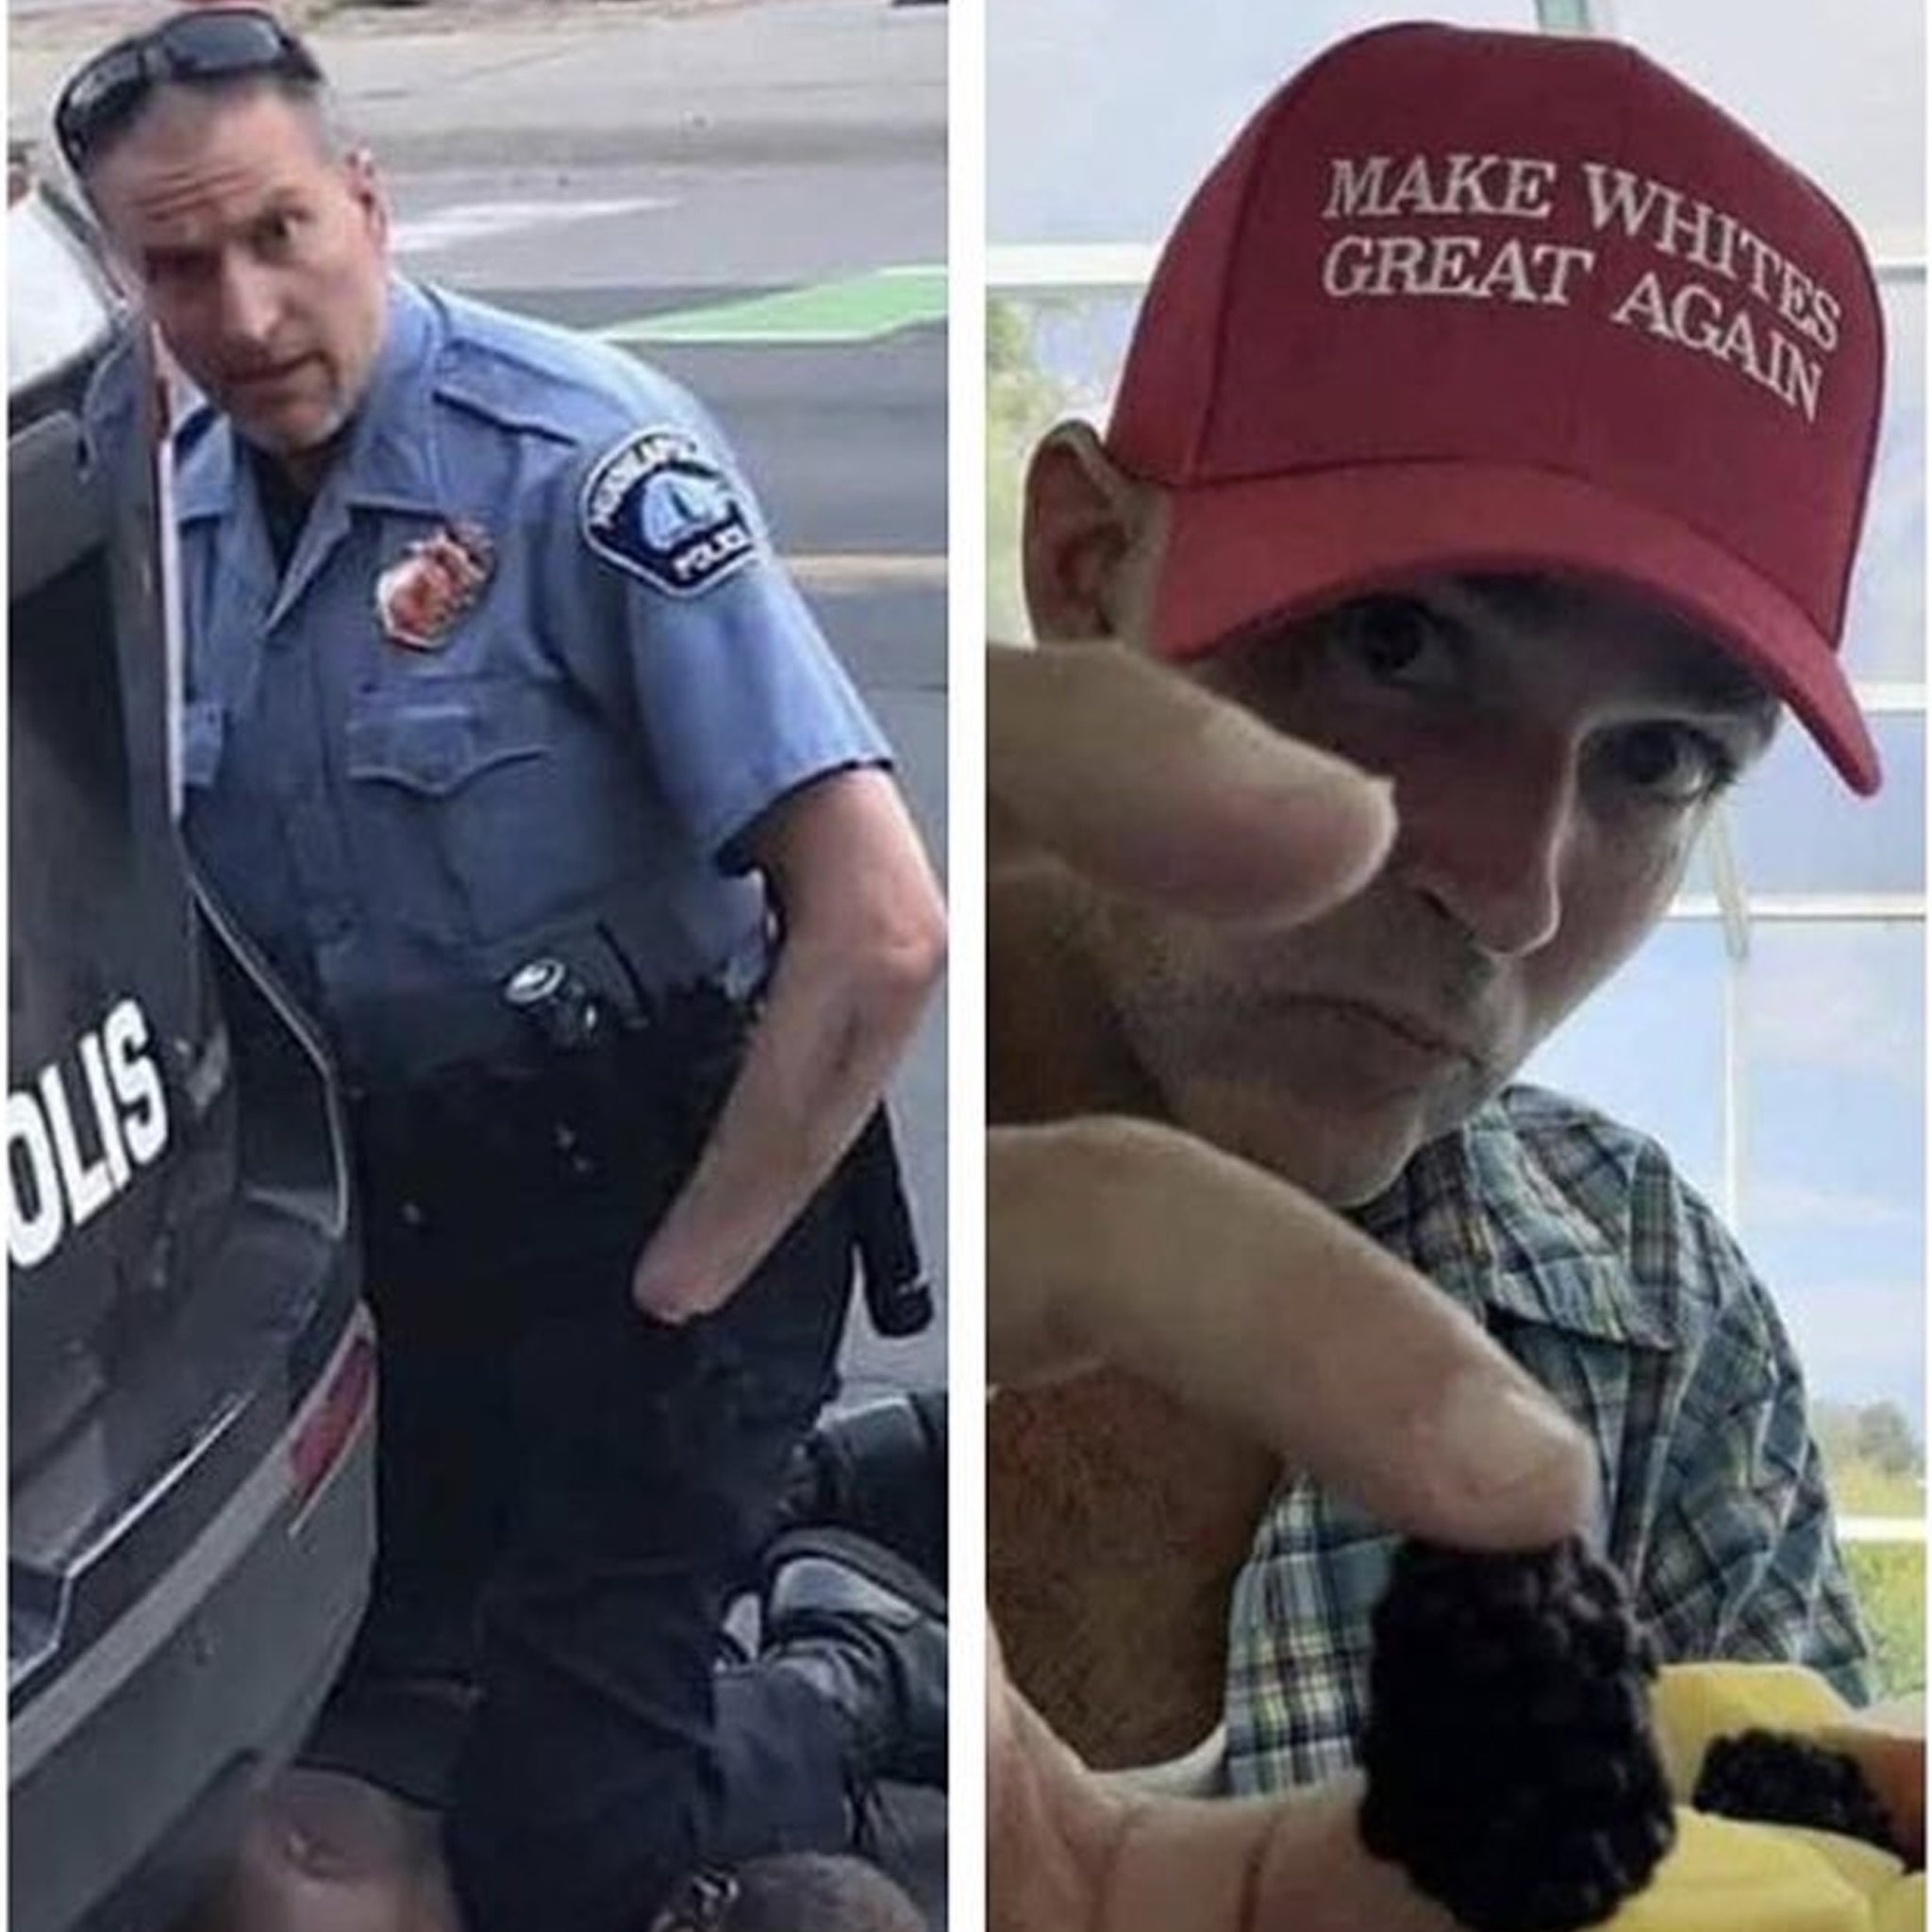 Make Whites Great Again' Guy Is Not George Floyd Cop, But Professional  Troll Jonathan Lee Riches